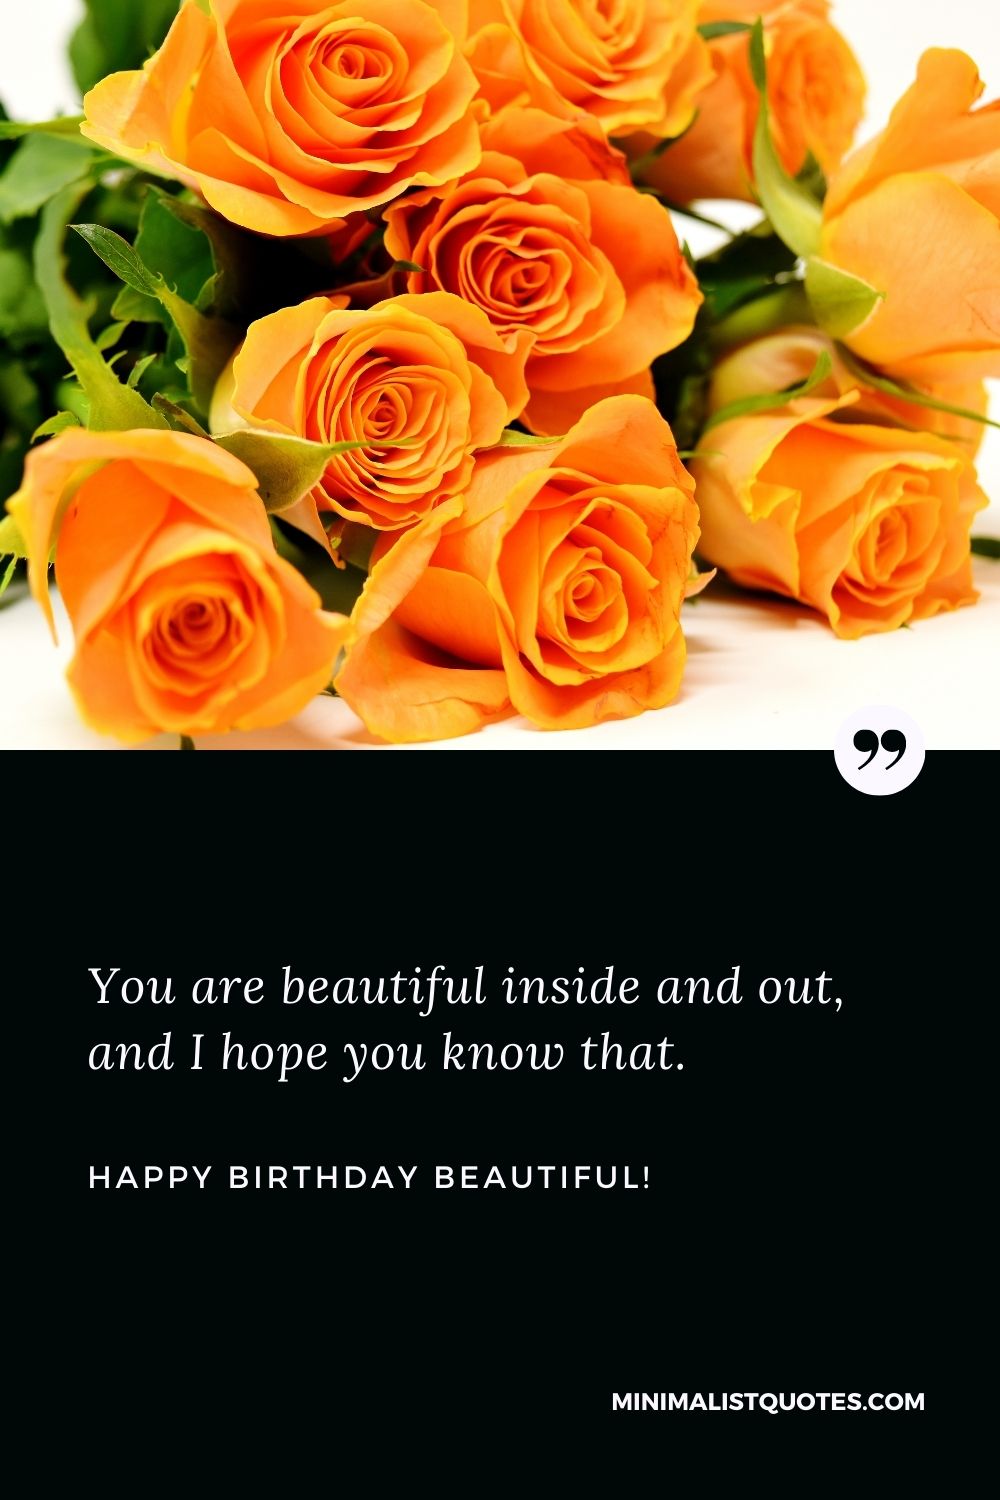 Happy birthday beautiful: You are beautiful inside and out, and I hope you know that. Happy Birthday Beautiful!